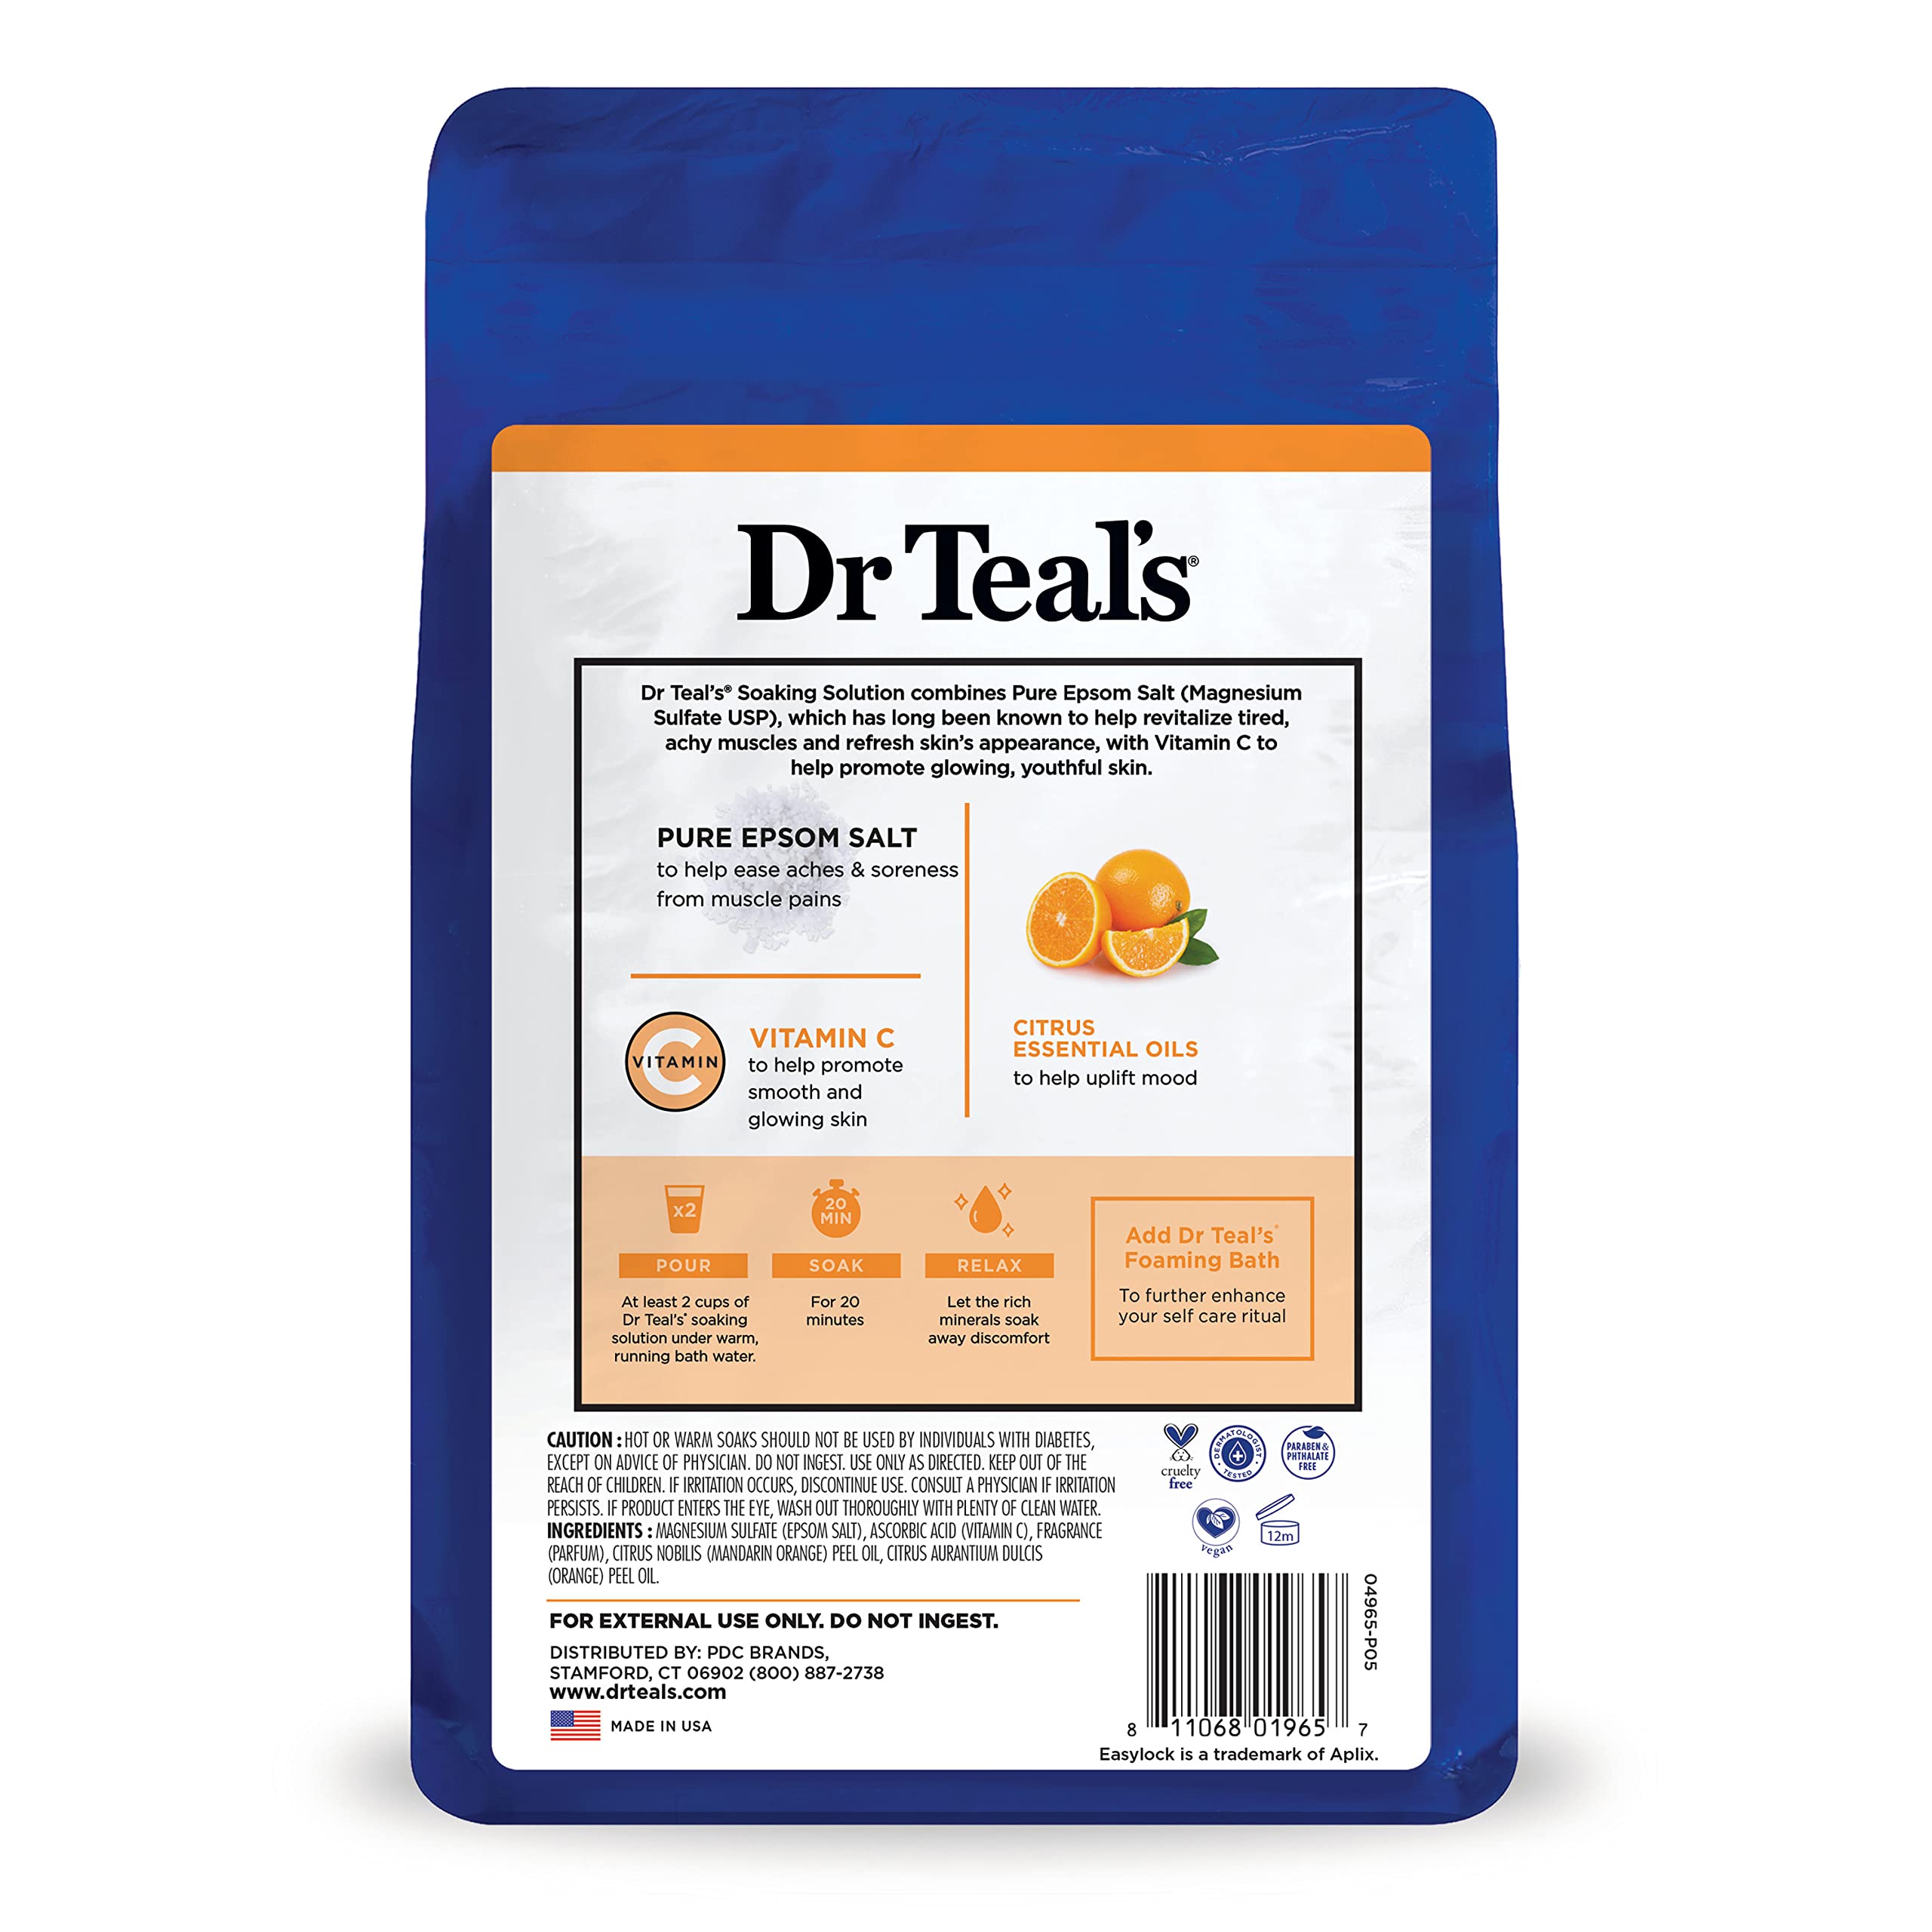 Dr Teal's Pure Epsom Salt Soak, Glow & Radiance with Vitamin C & Citrus Essential Oils, 3 lbs (Pack of 4) (Packaging May Vary)